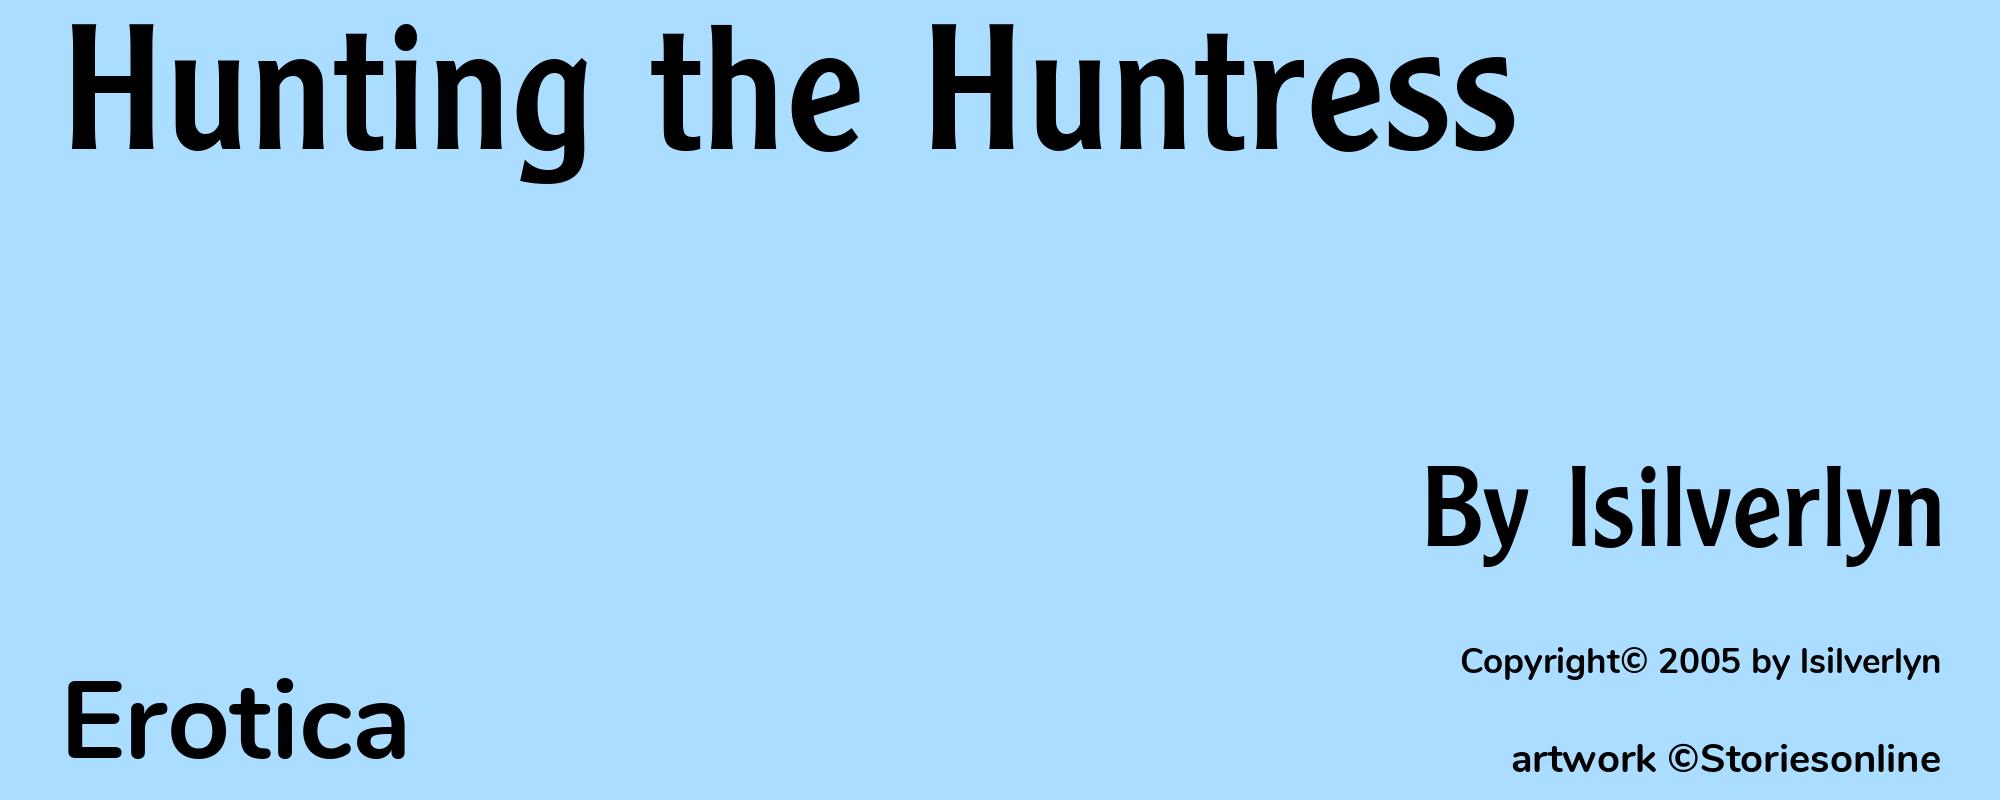 Hunting the Huntress - Cover